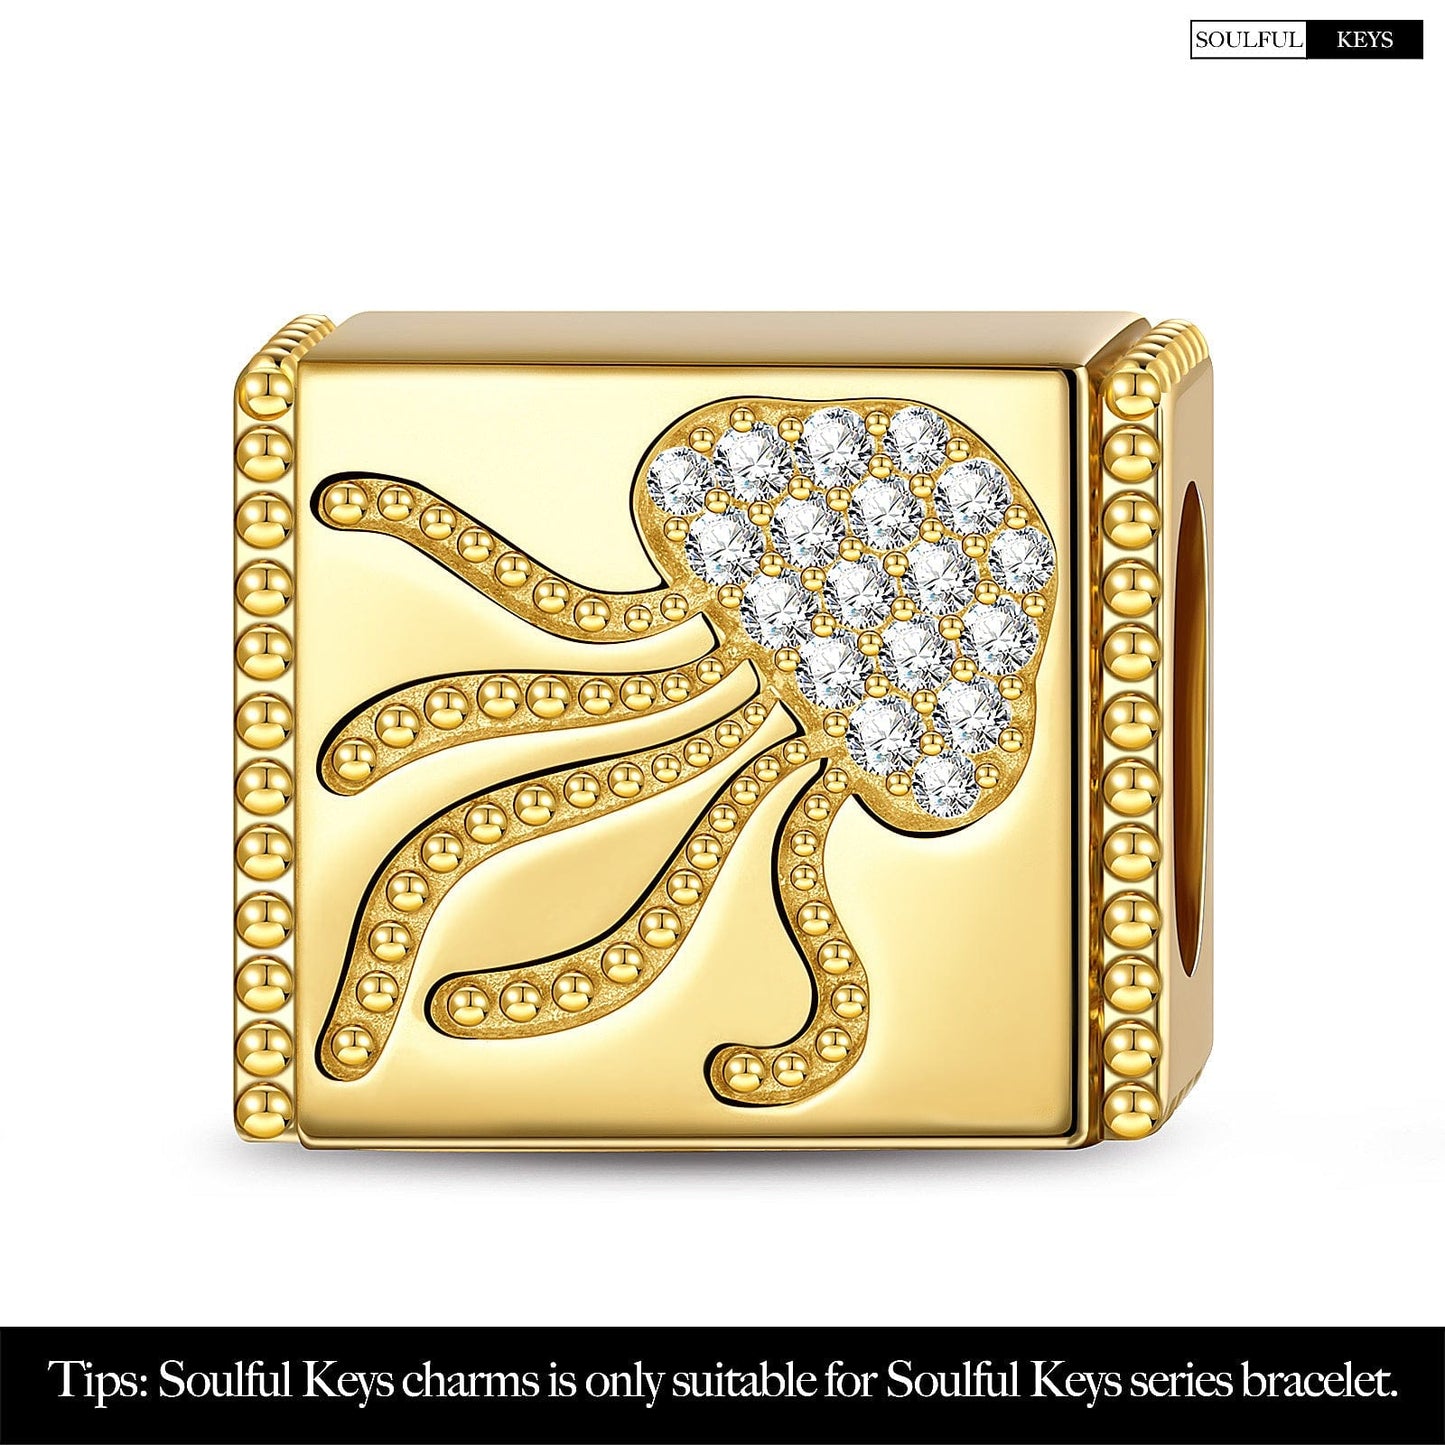 Ethereal Jellyfish Tarnish-resistant Silver Rectangular Charms In 14K Gold Plated